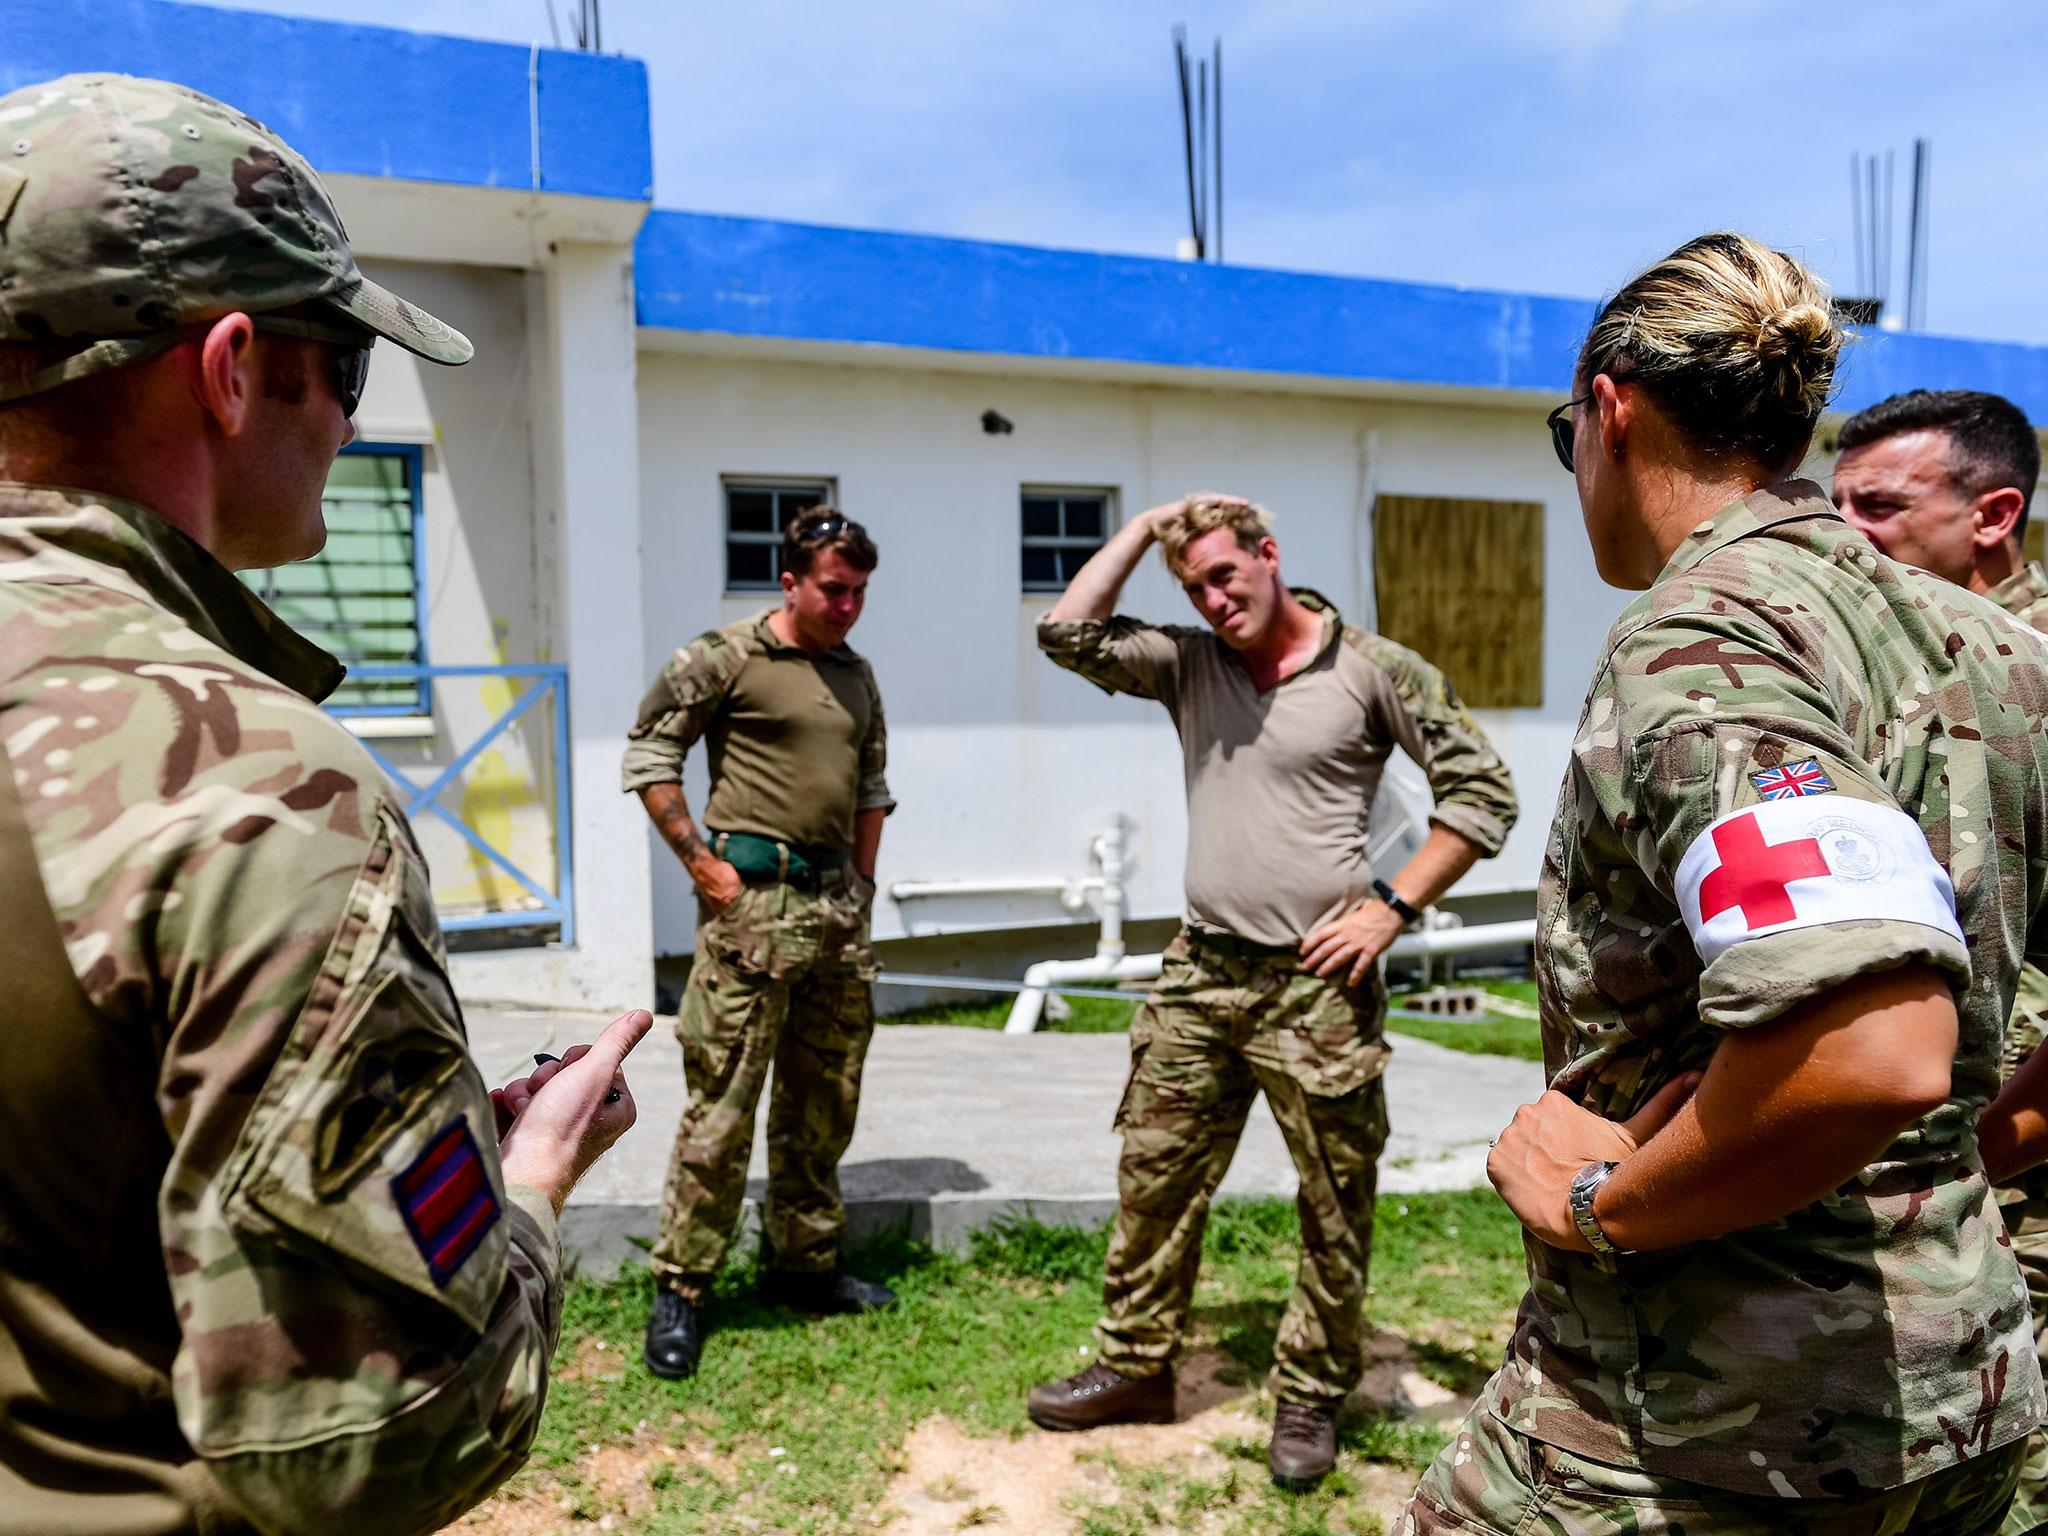 RAF Medics from Tactical Medical Wing, RAF Brize Norton, along with British Army Engineers and Royal Marines assess the damage at Princess Alexandra Hospital, in the Island of Anguilla